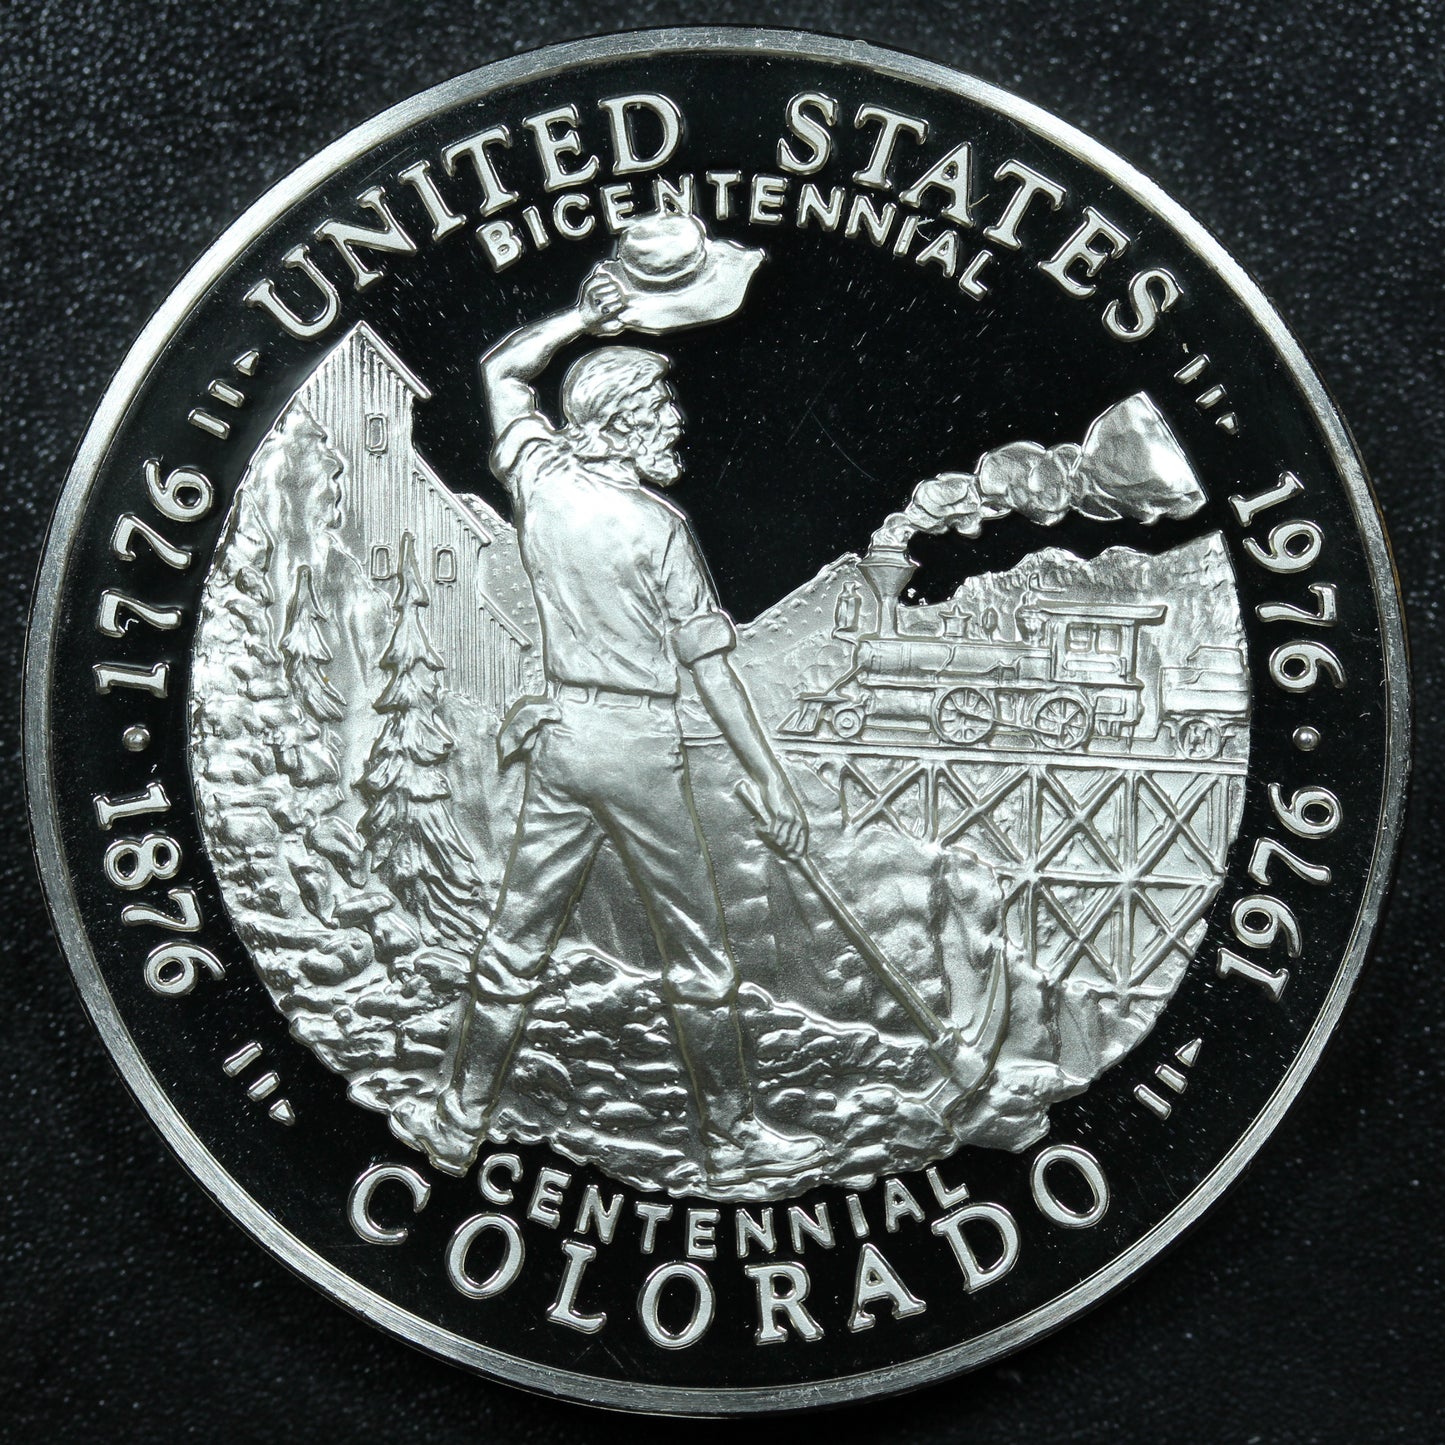 Franklin Mint 50 State Bicentennial Medal - COLORADO Sterling Silver Proof w/ Capsule